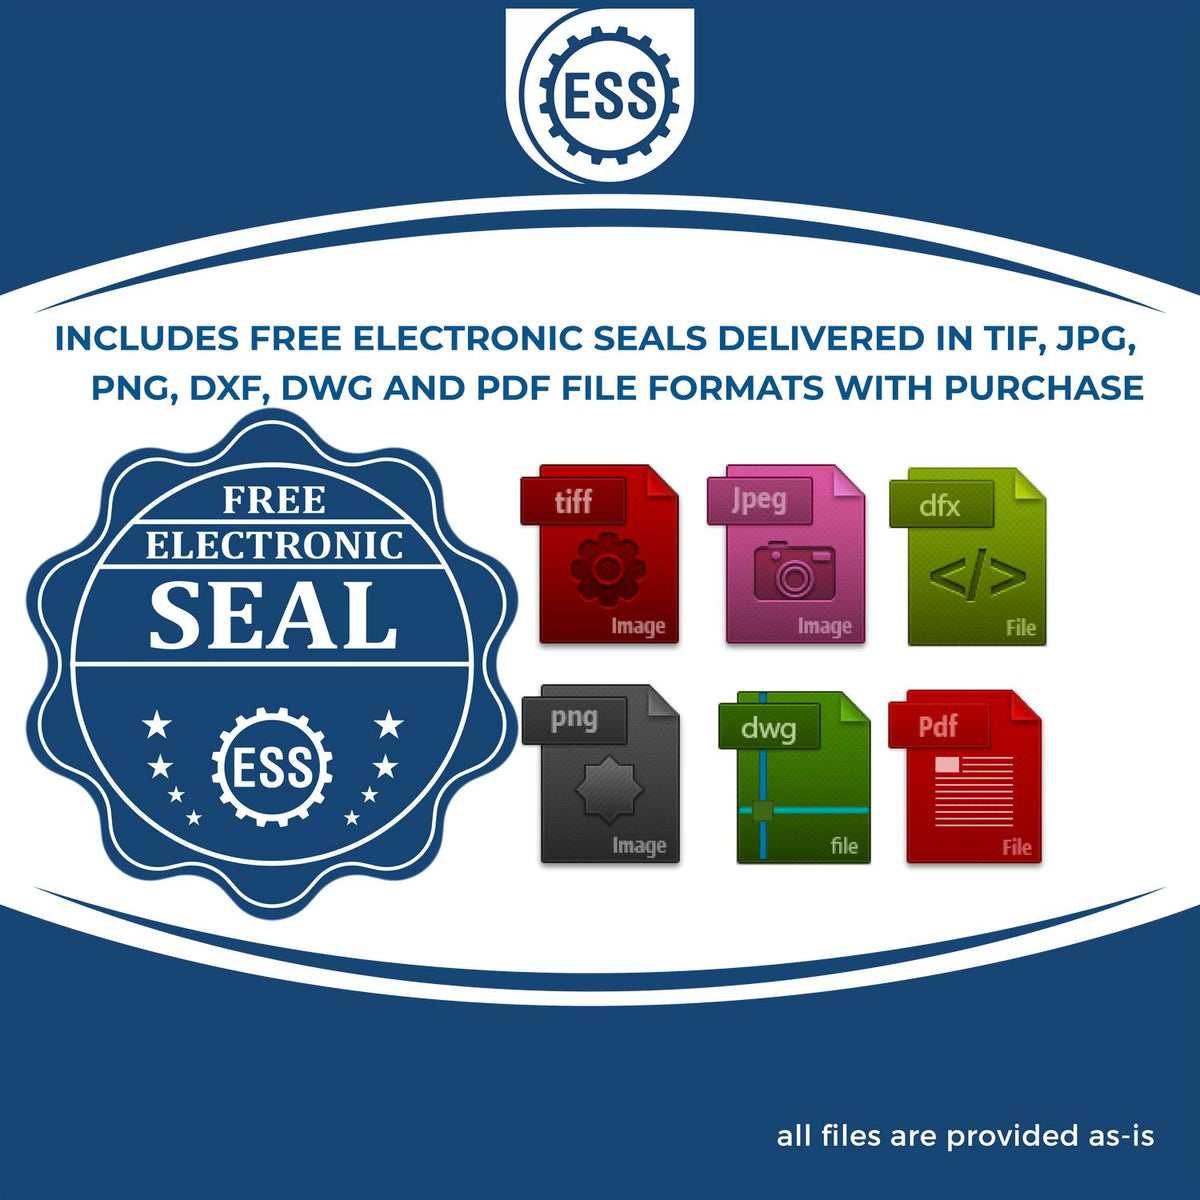 An infographic for the free electronic seal for the Hybrid Minnesota Engineer Seal illustrating the different file type icons such as DXF, DWG, TIF, JPG and PNG.